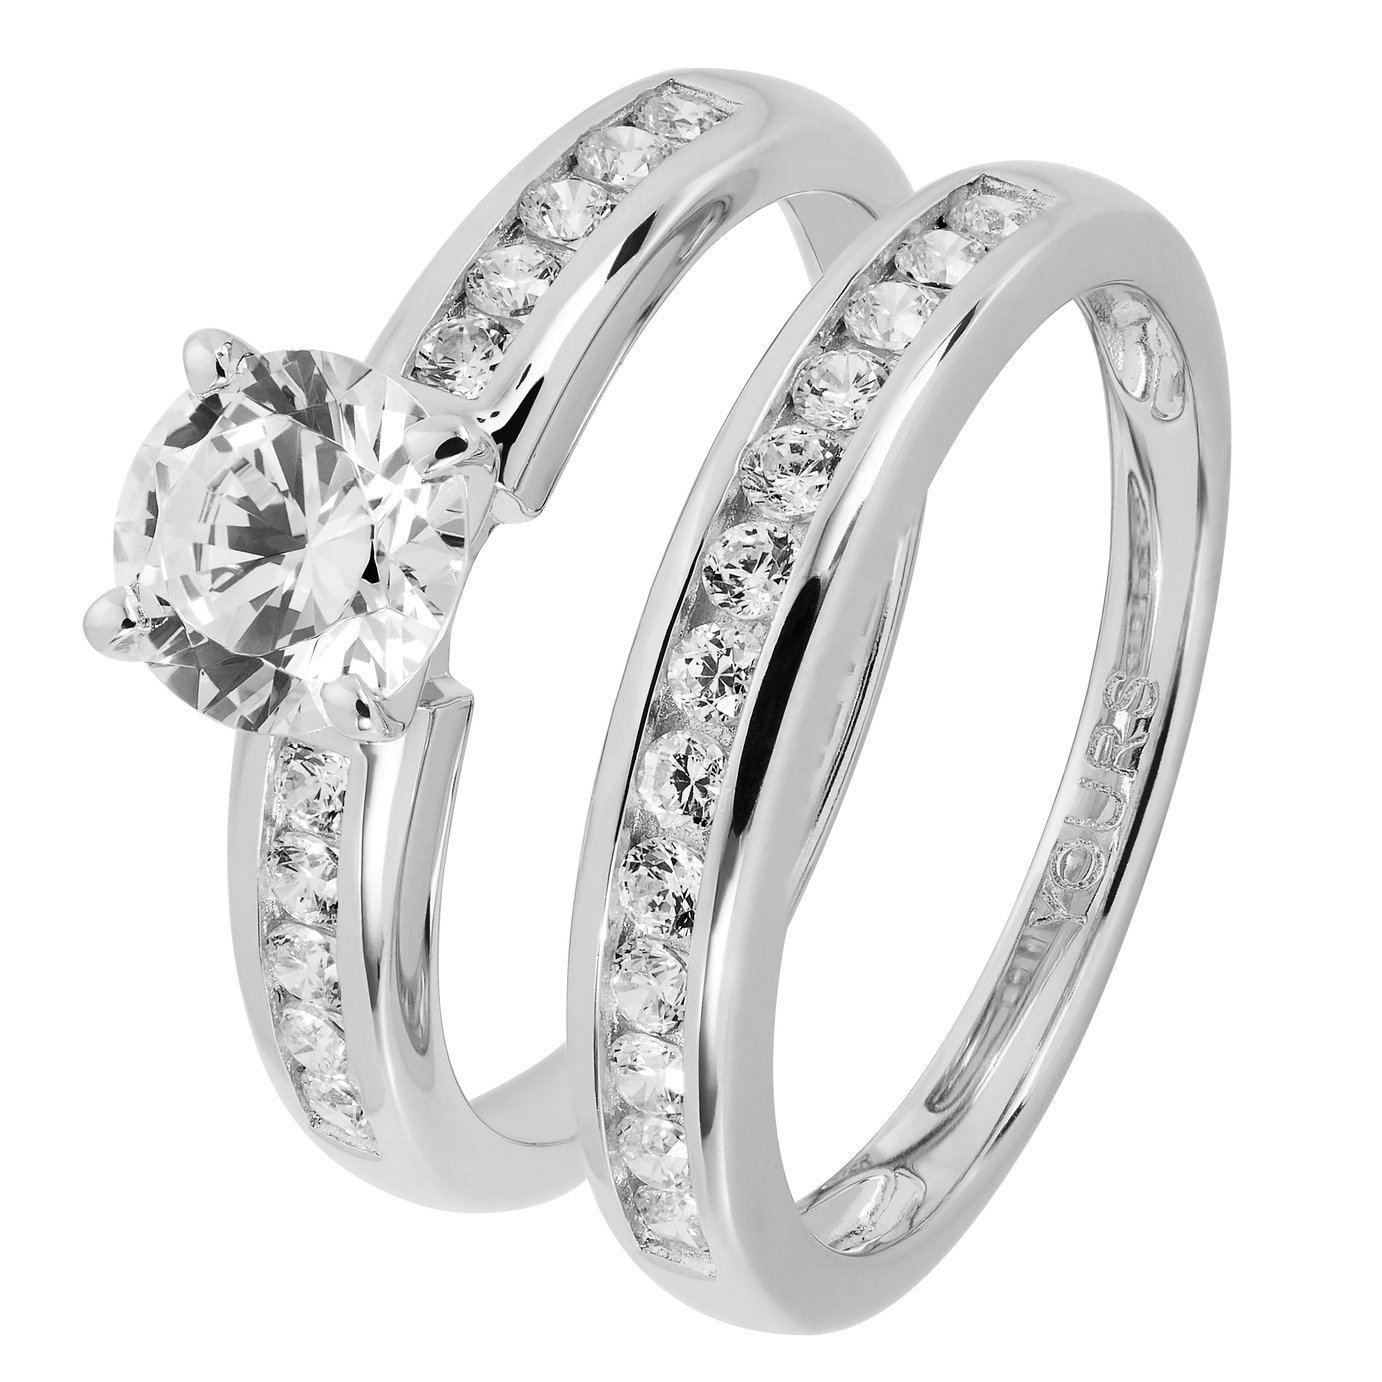 Revere Sterling Silver Cubic Zirconia Engagement Ring - Q